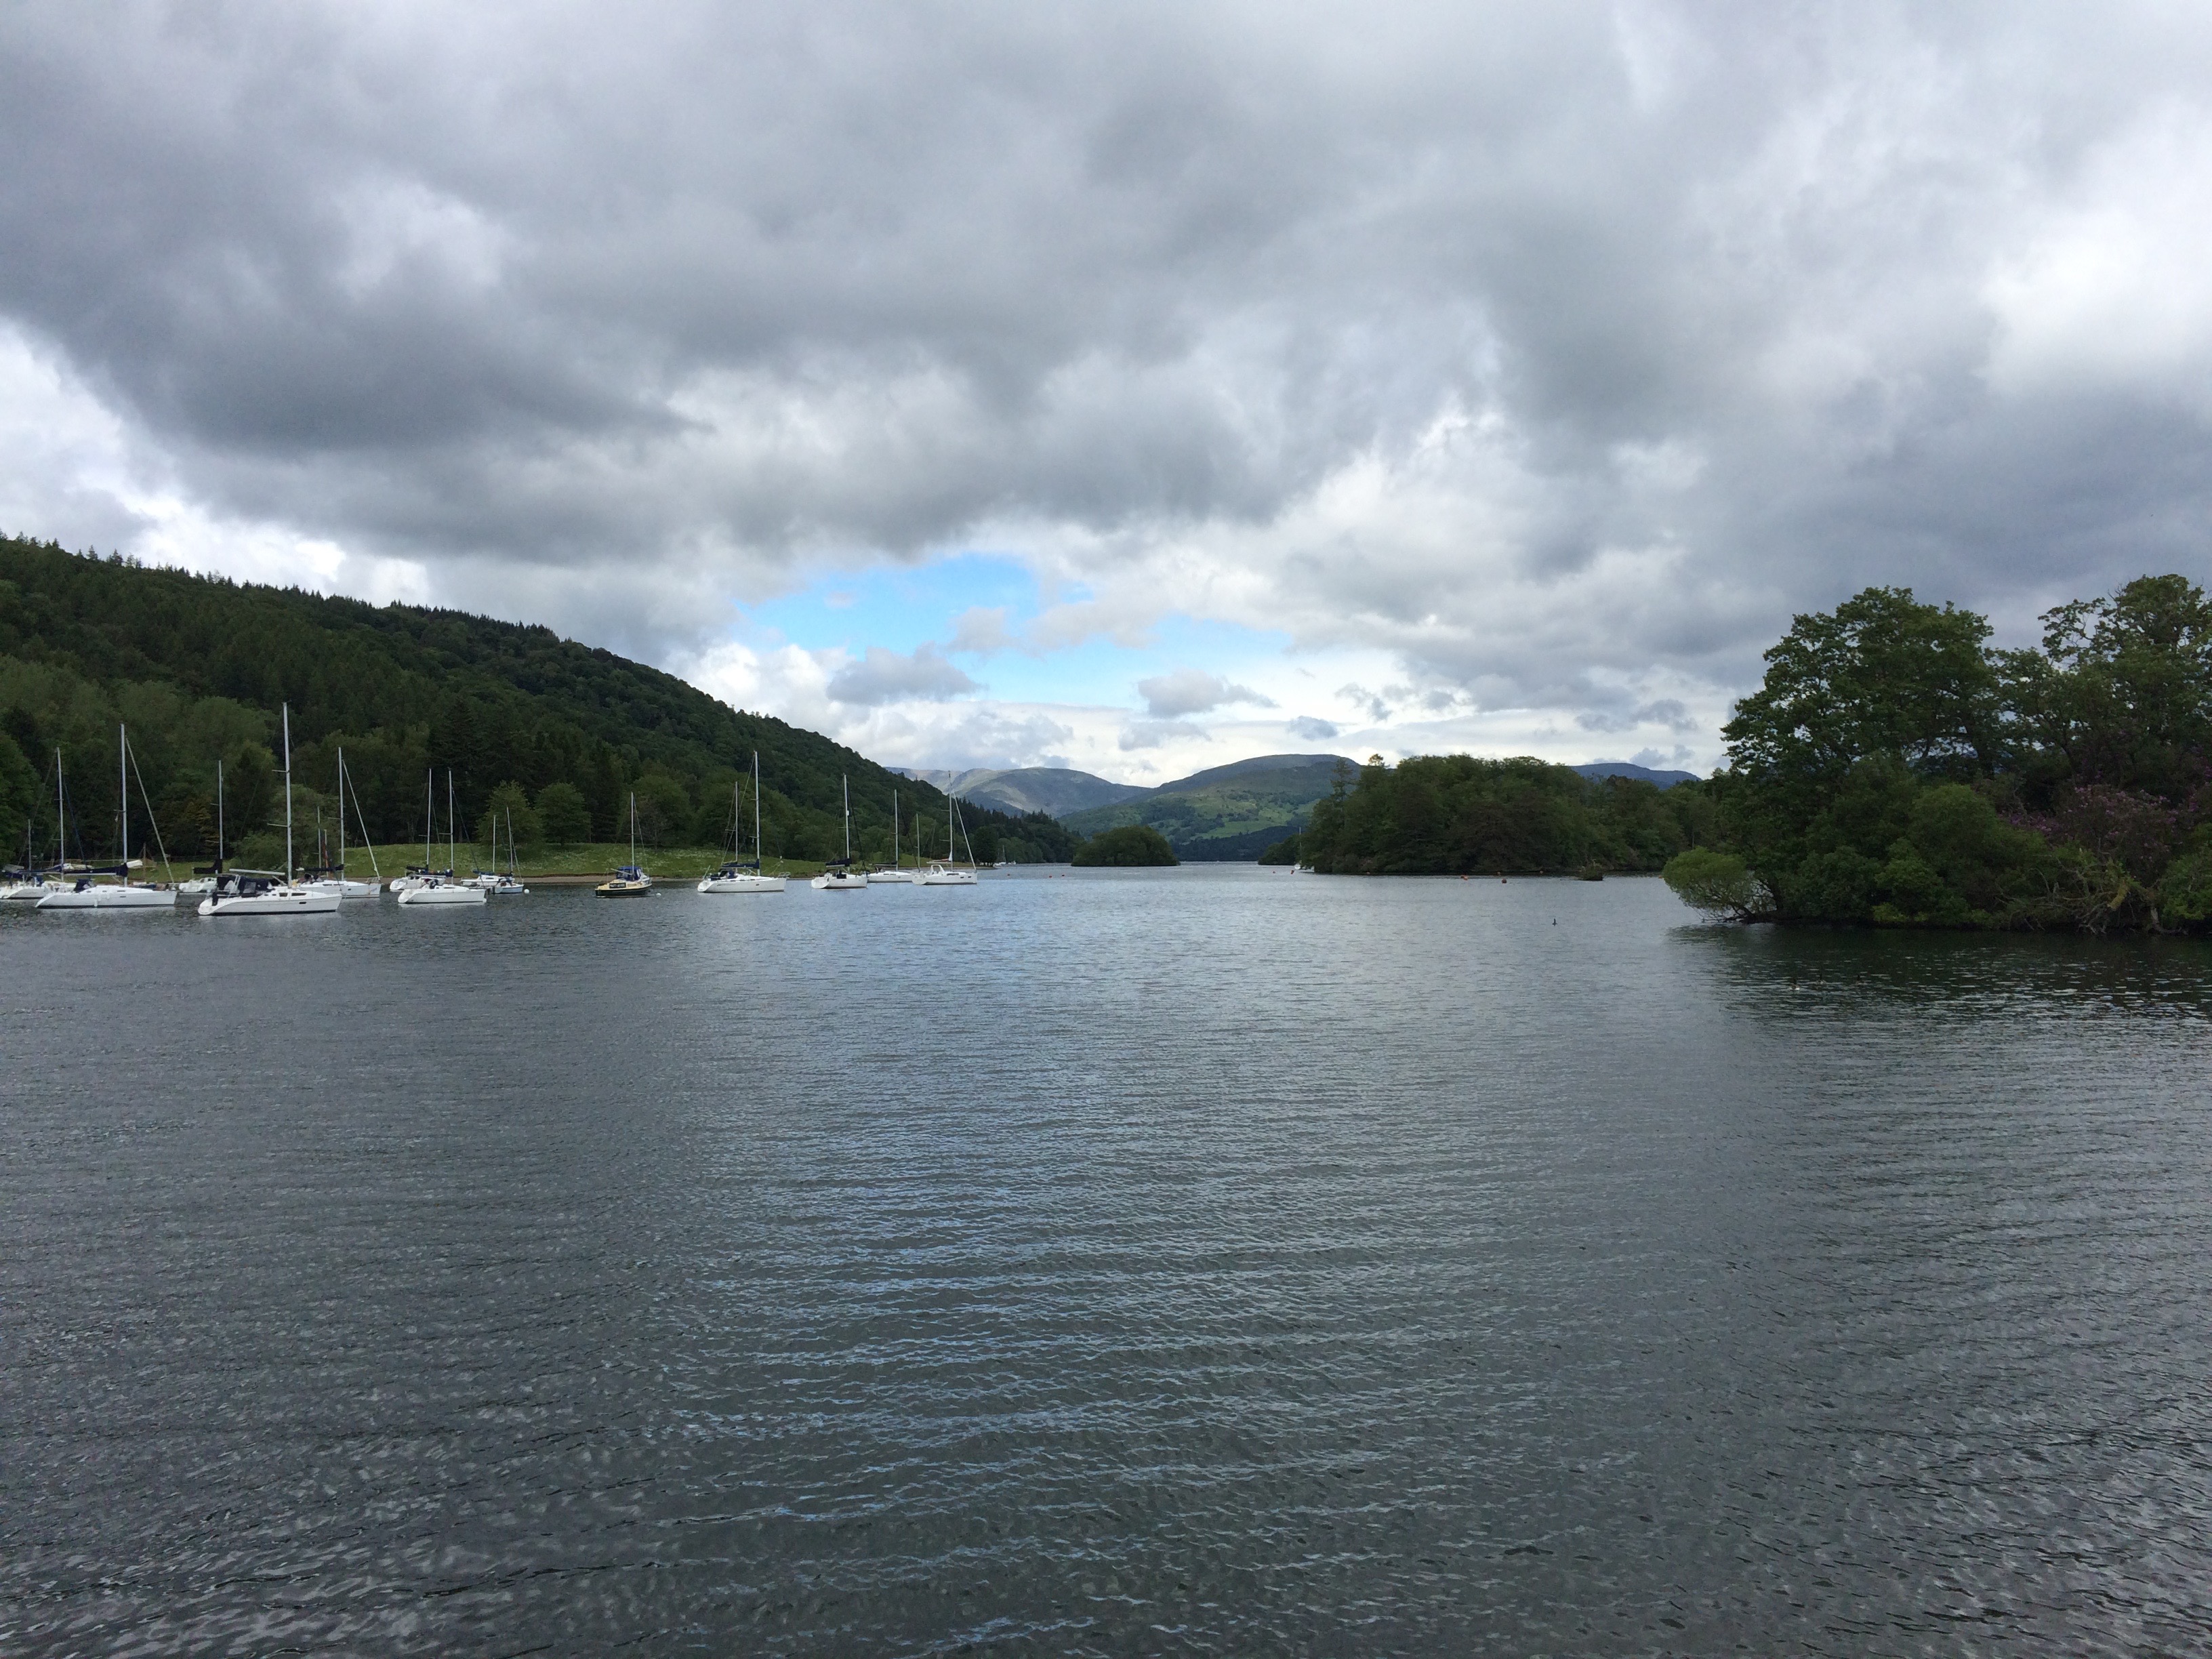 On Windermere looking south